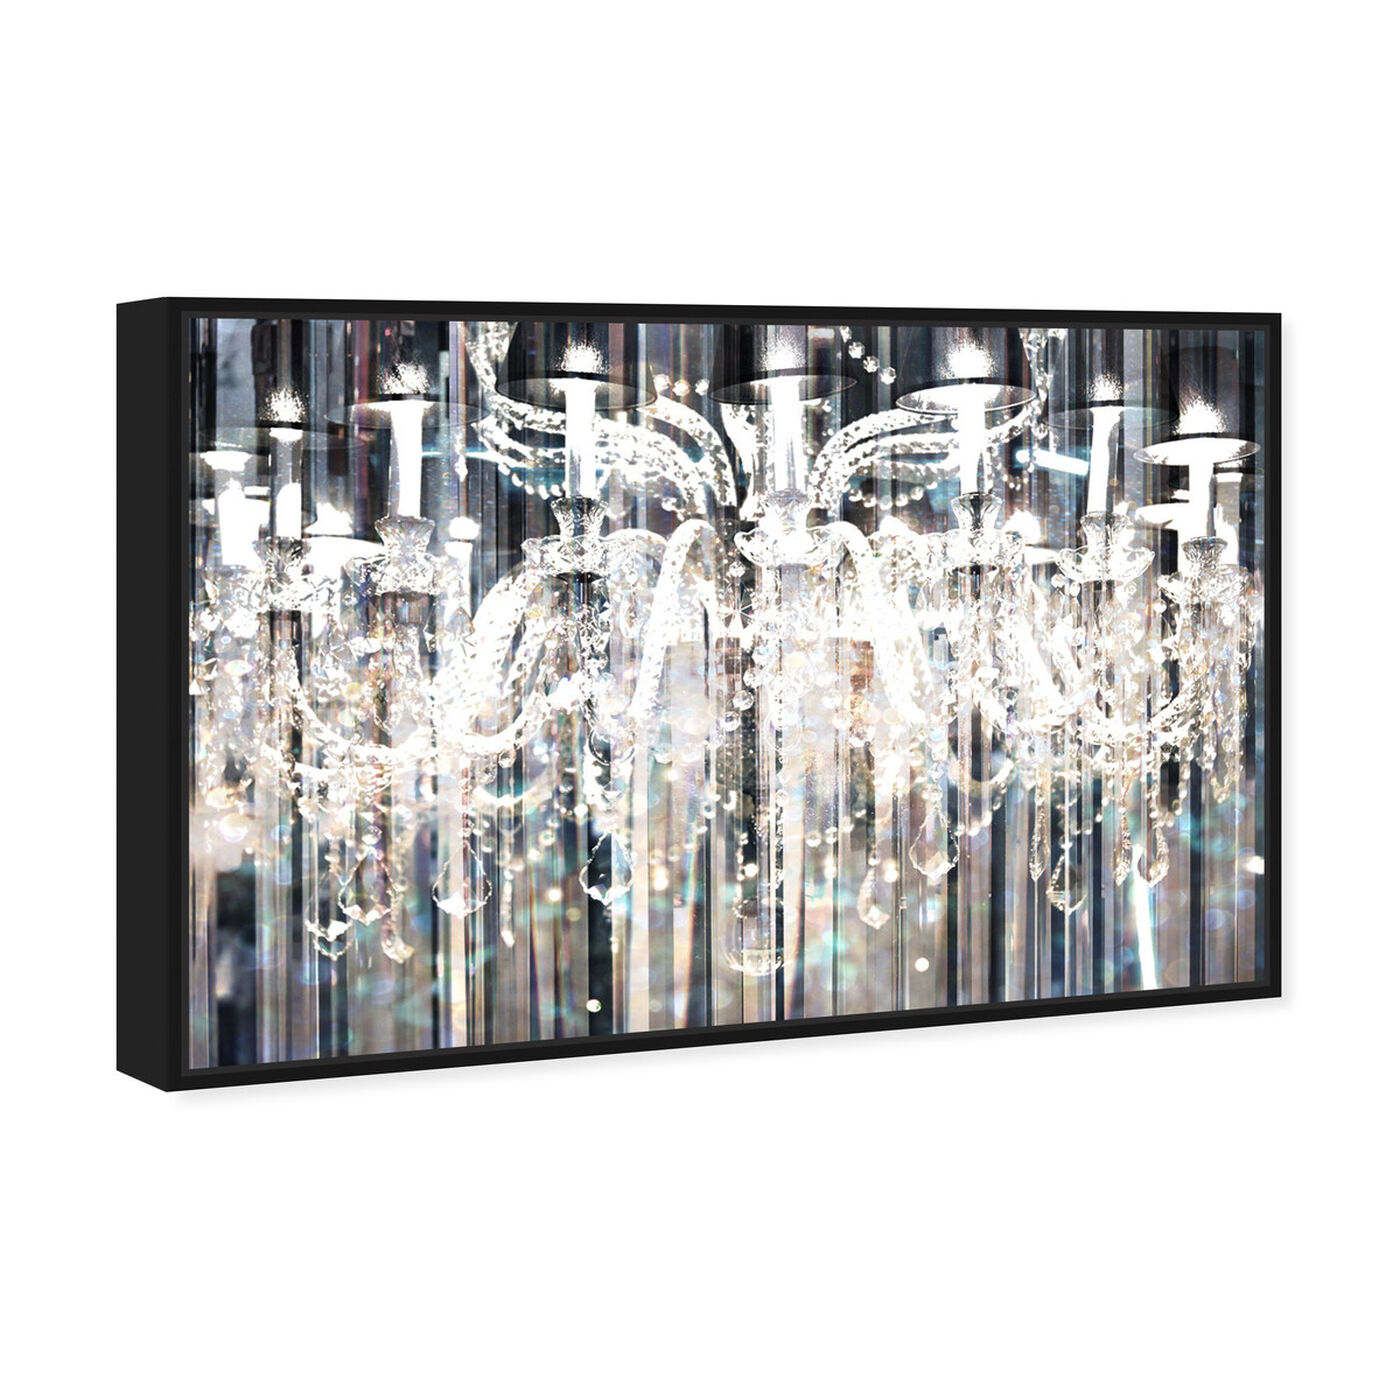 Angled view of Diamond Shower featuring fashion and glam and chandeliers art.